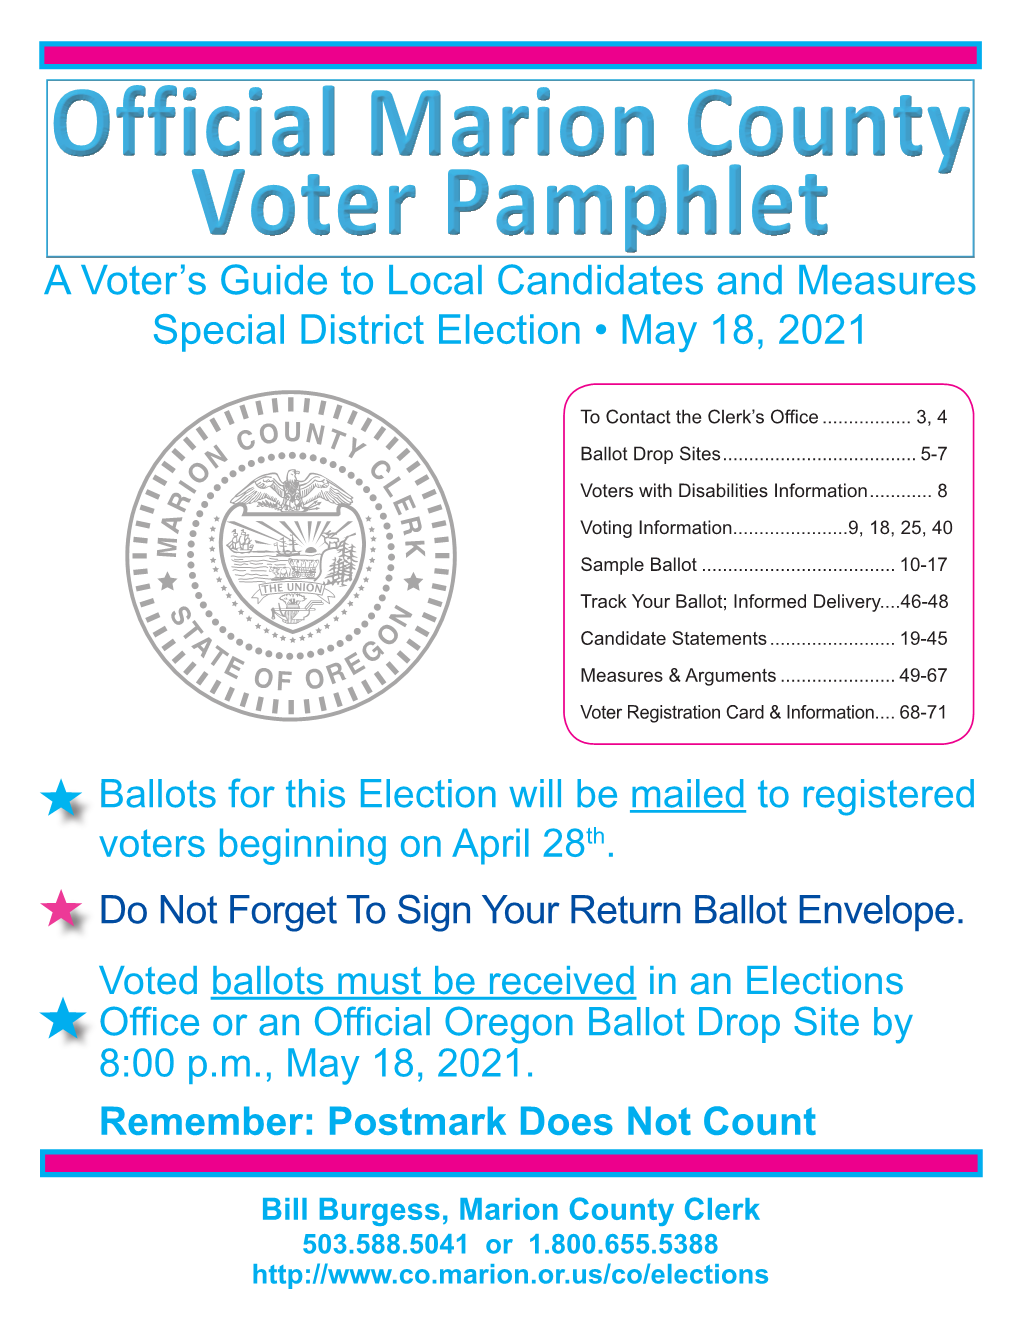 May 18, 2021 Voter Pamphlet